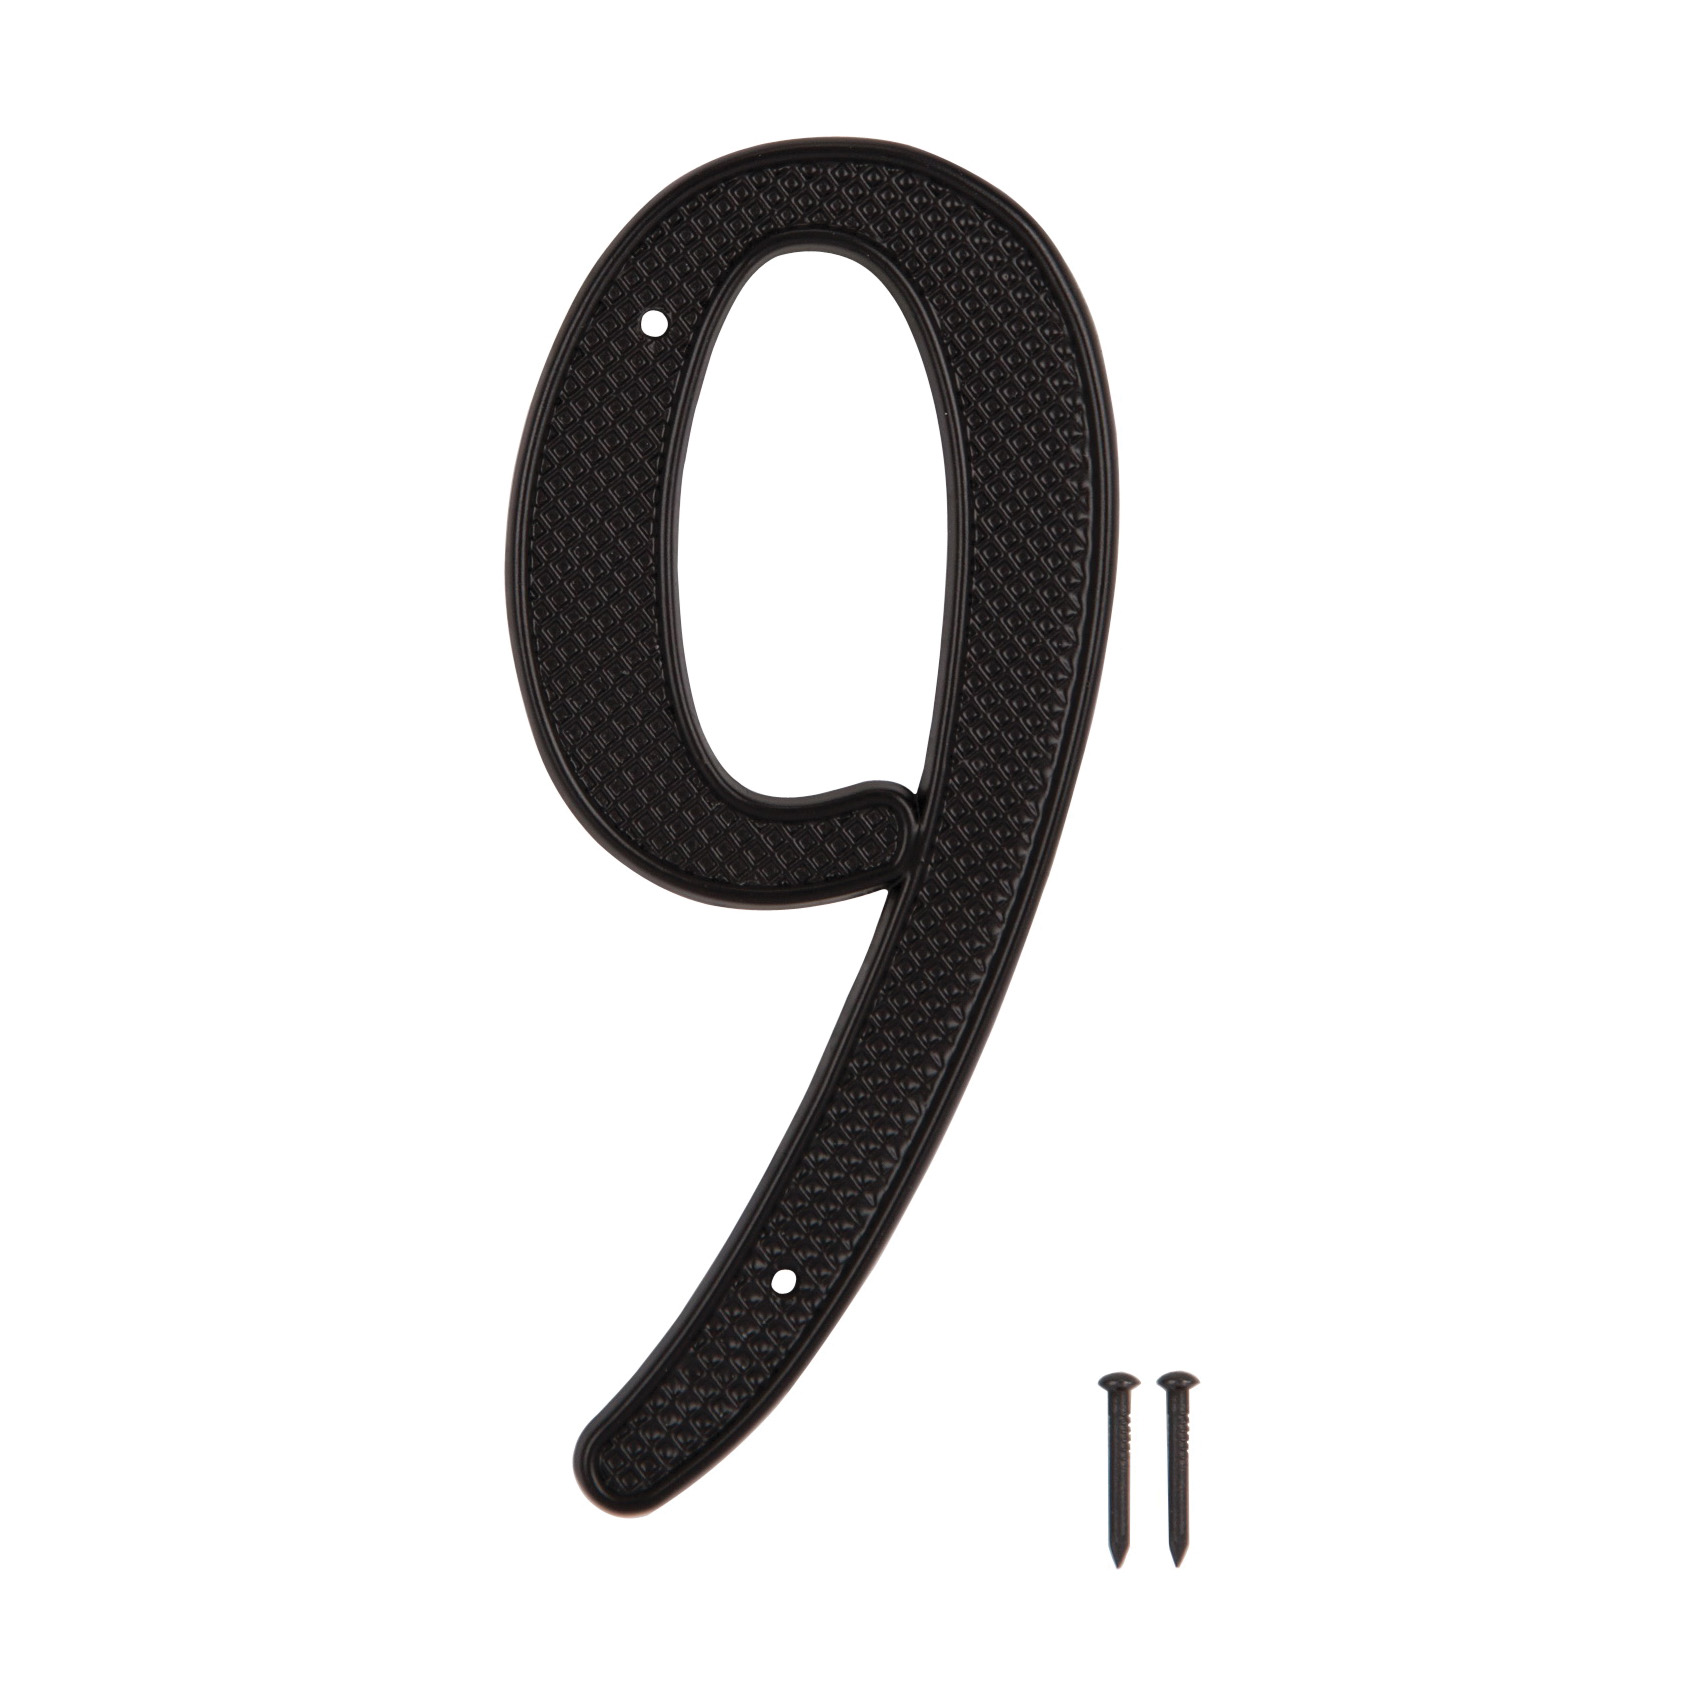 N-019-PS House Number, Character: 9, 4 in H Character, 2.28 in W Character